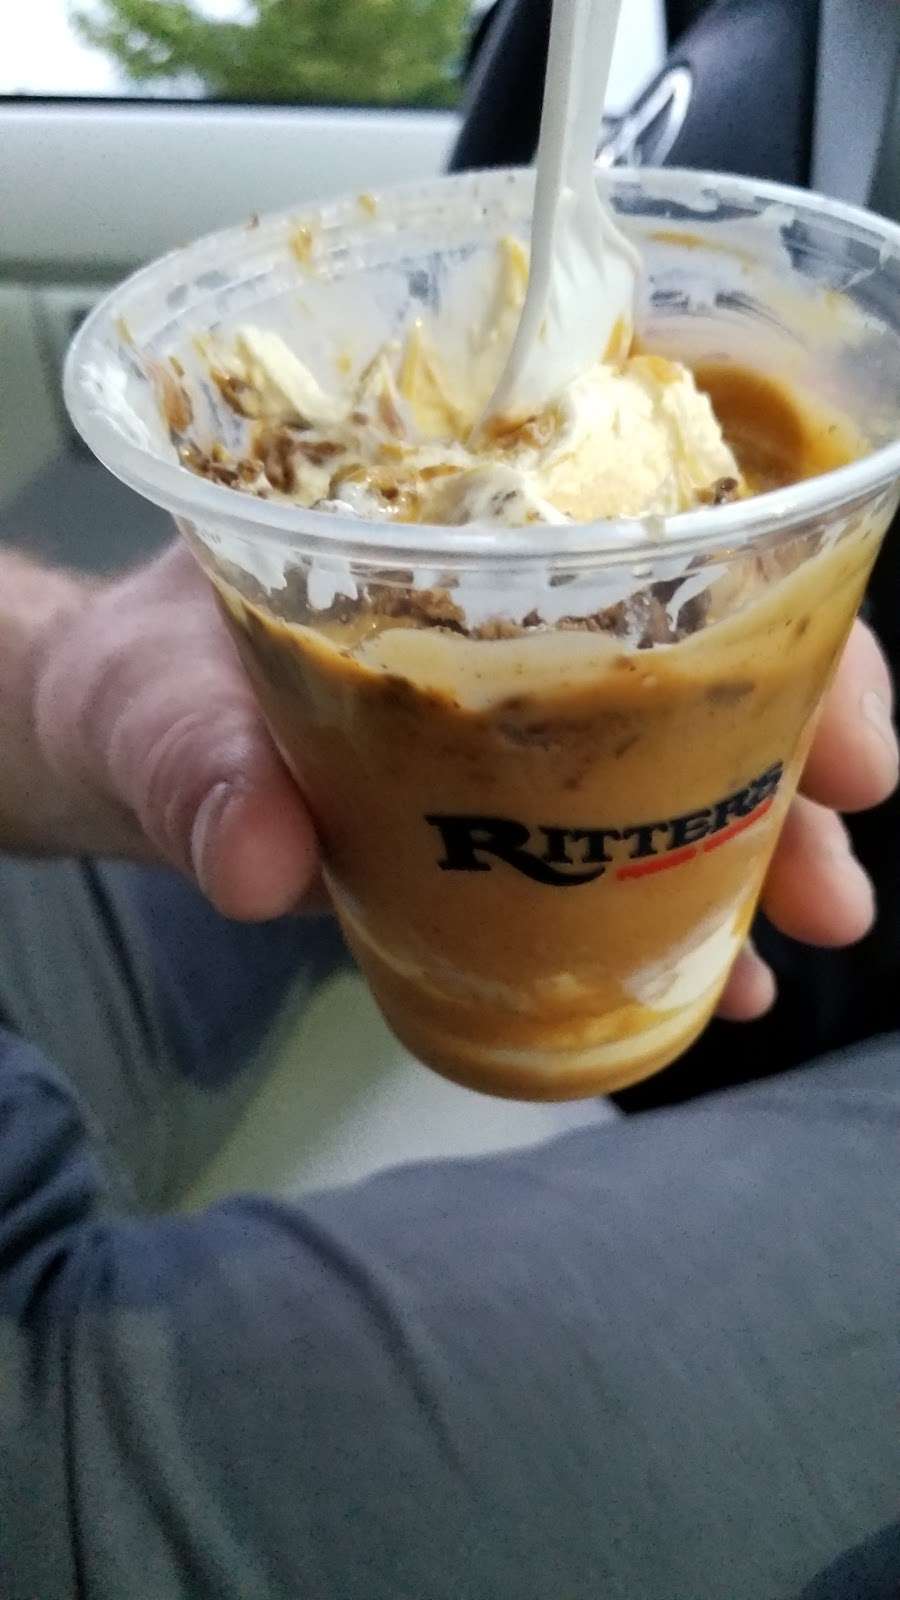 Ritters Frozen Custard | 4840 W 57th St, Indianapolis, IN 46254, USA | Phone: (317) 293-1417